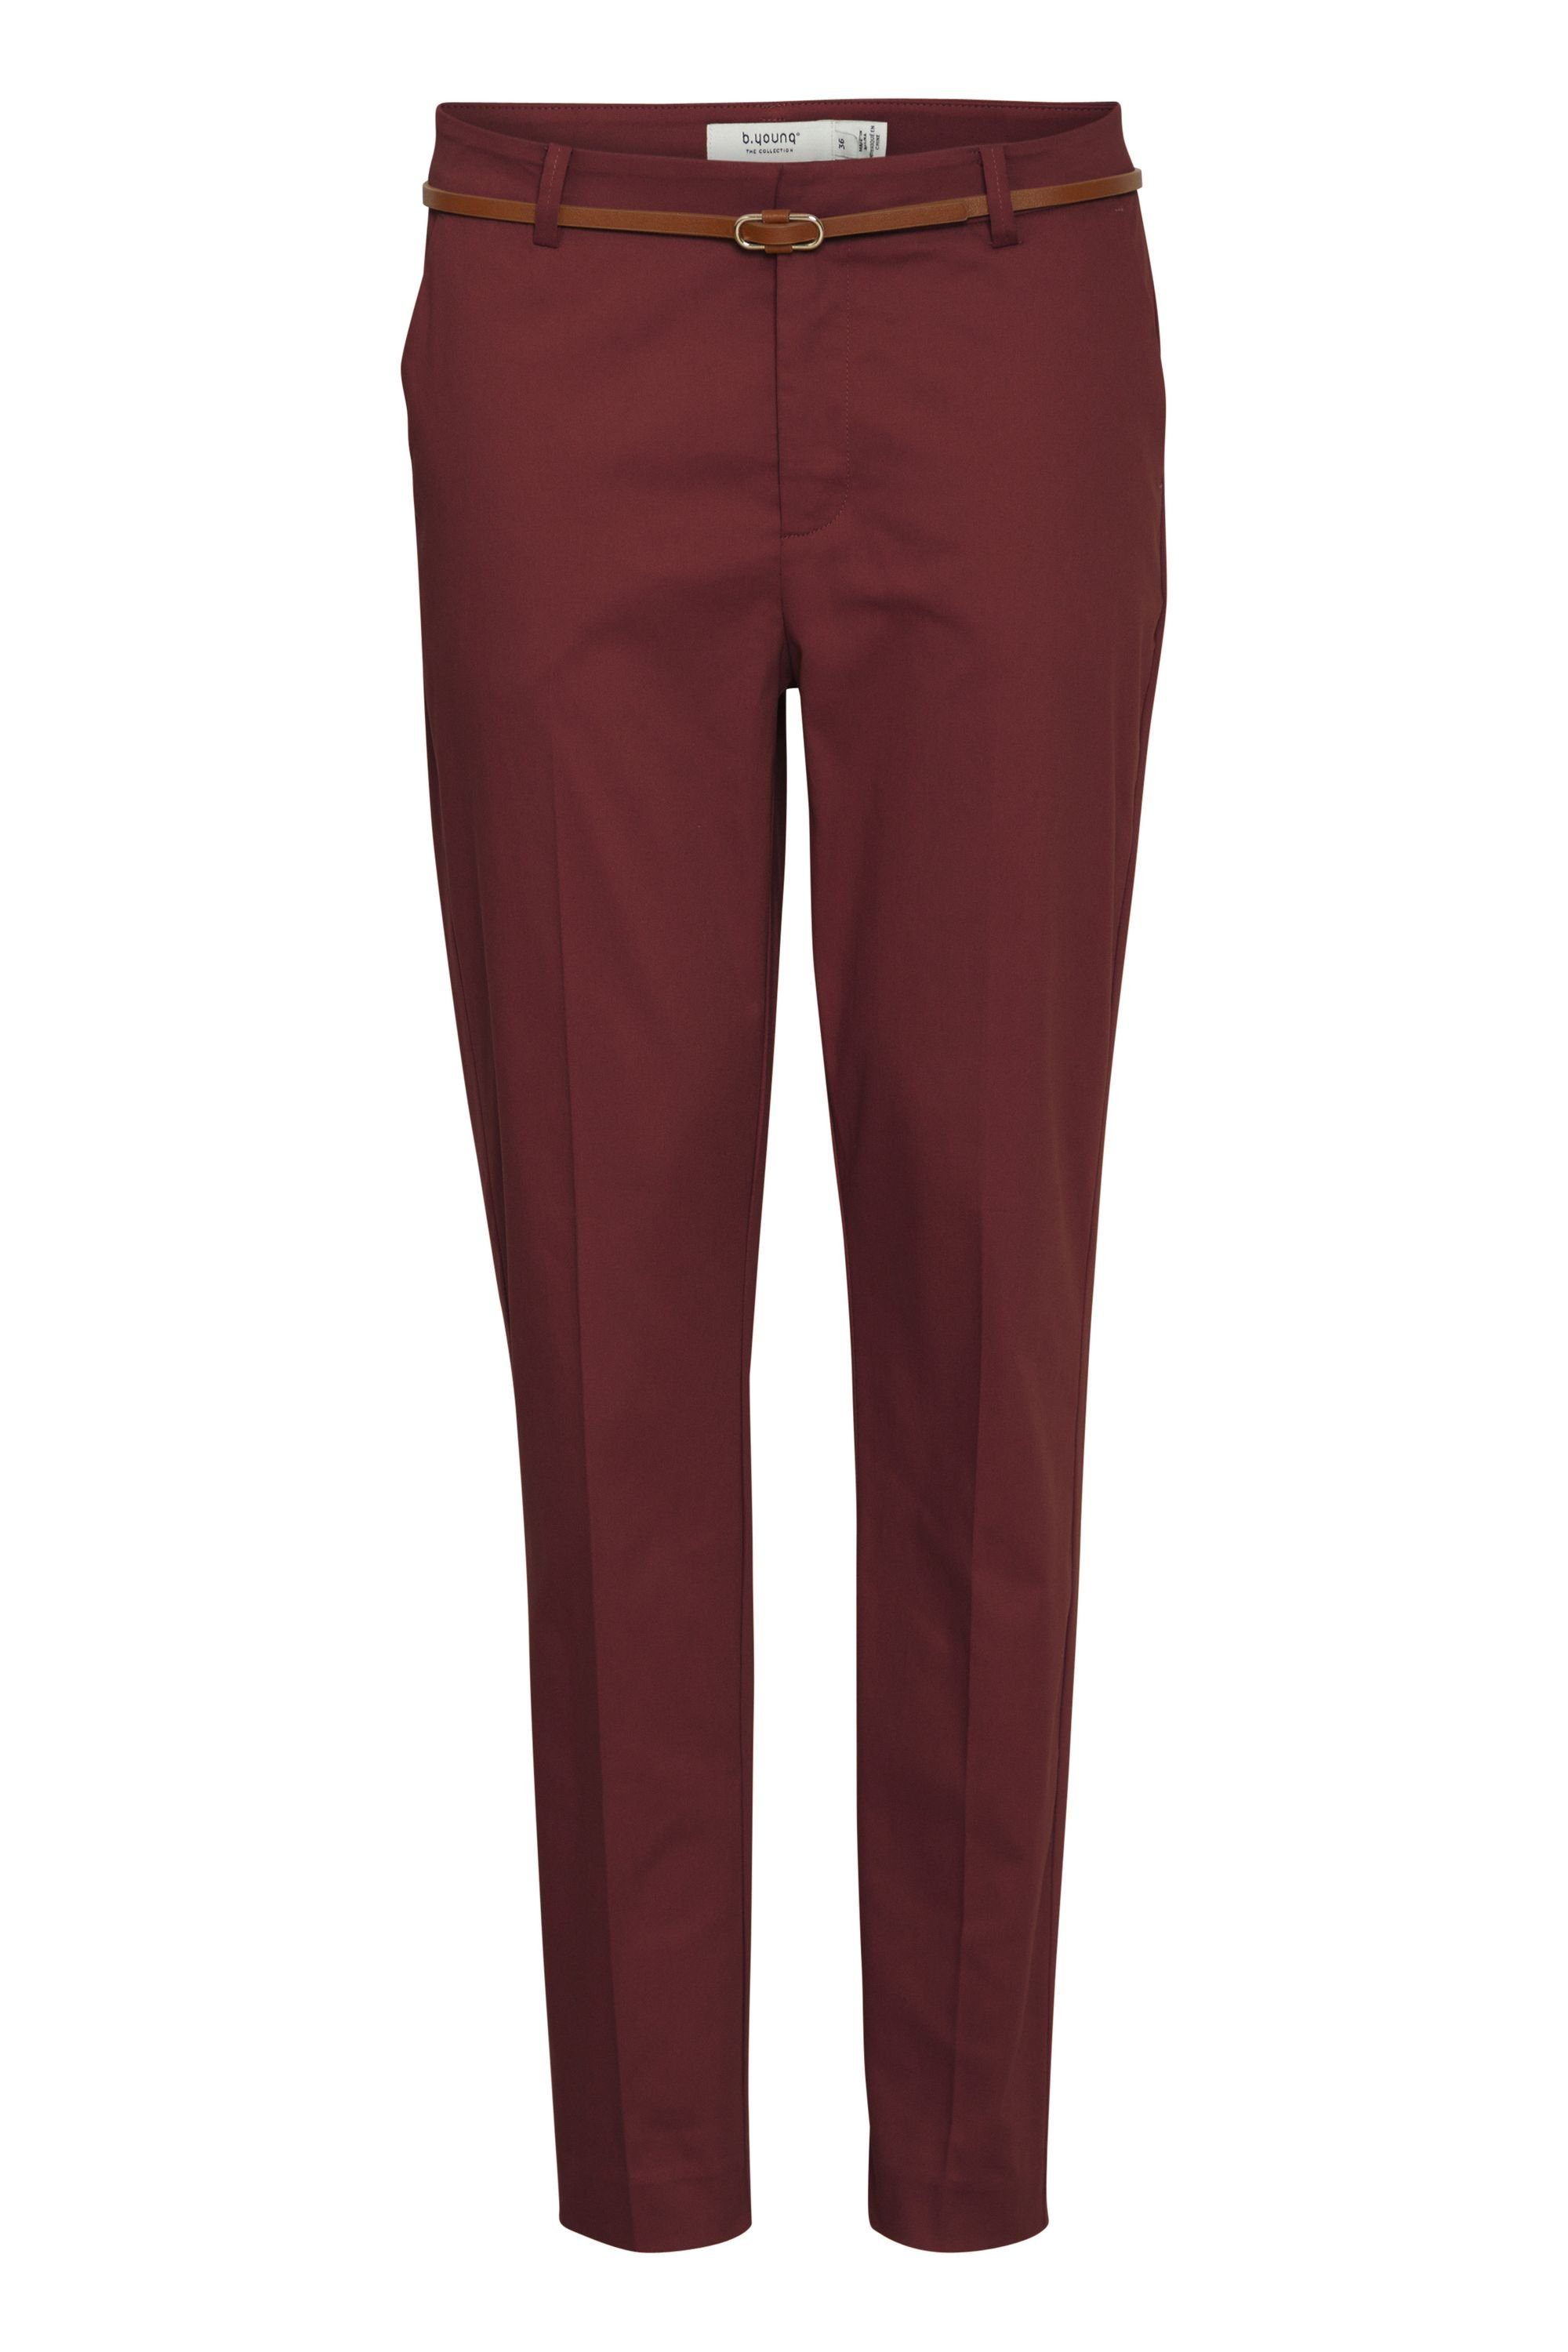 cigaret Chinohose Lange (191627) BYDays Chinostyle Hose coolen - 20803473 pants Royale 2 im b.young Port